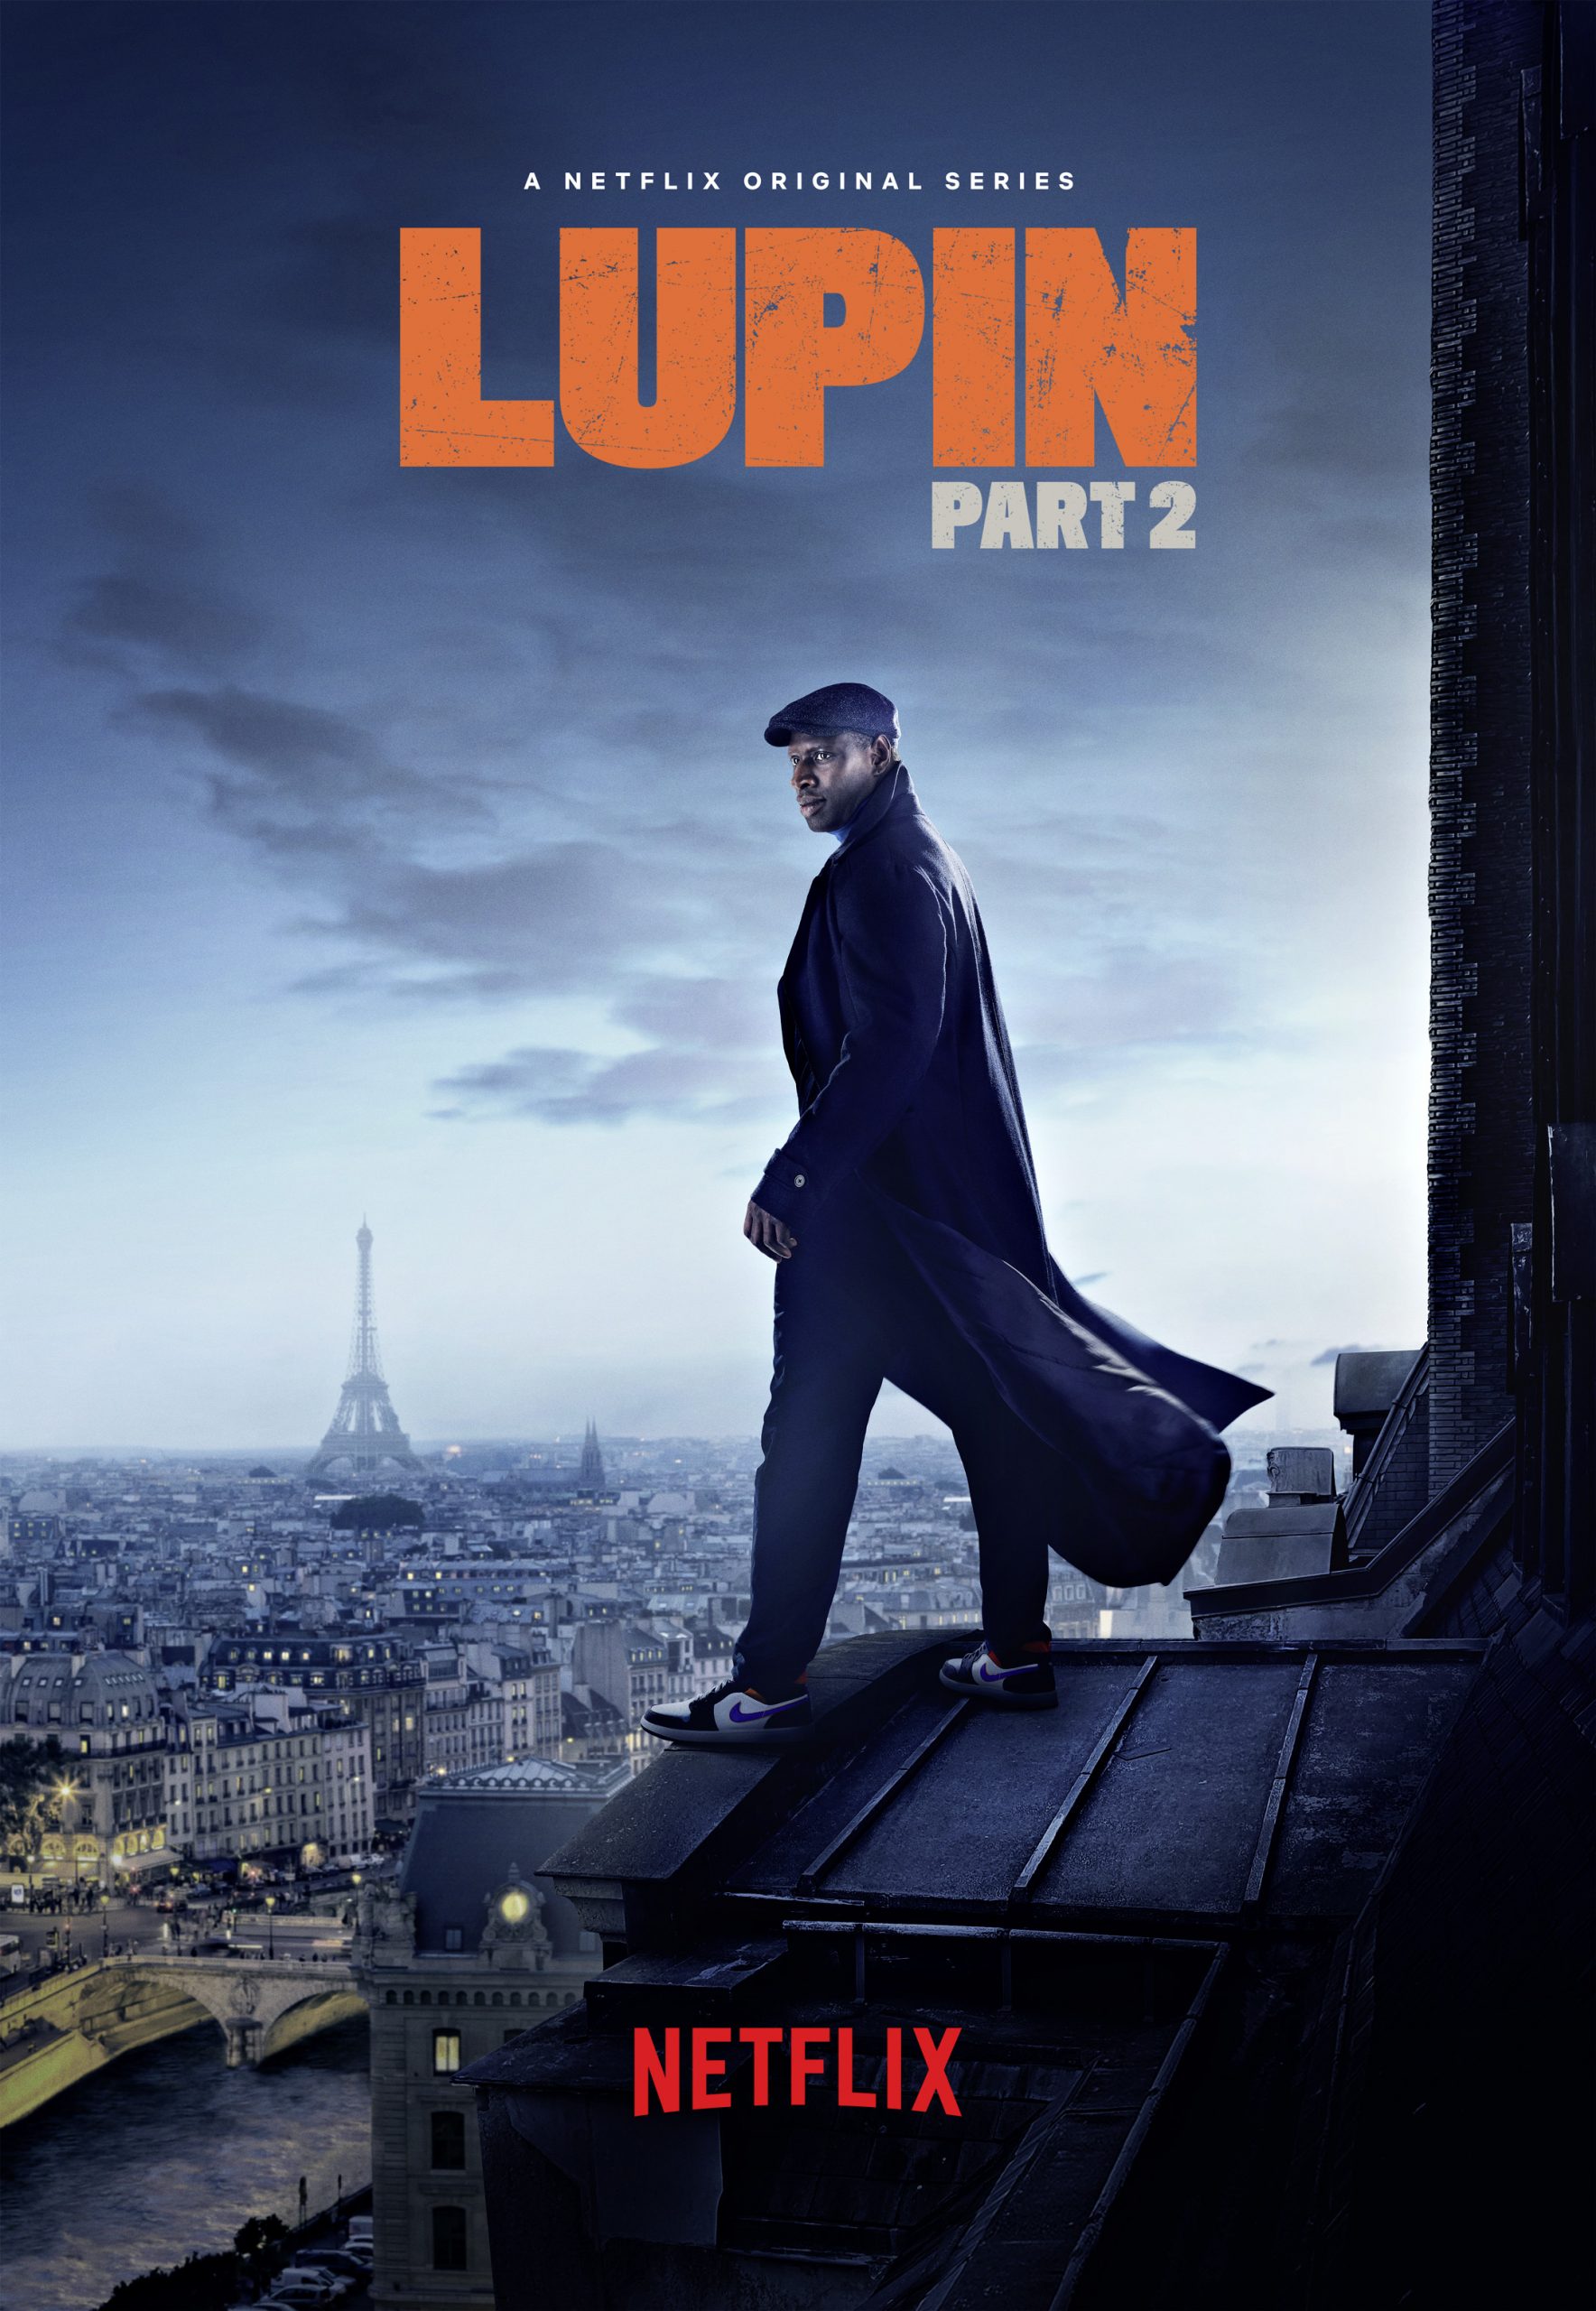 First Look: Netflix’s Lupin Part 2 Starring Omar Sy